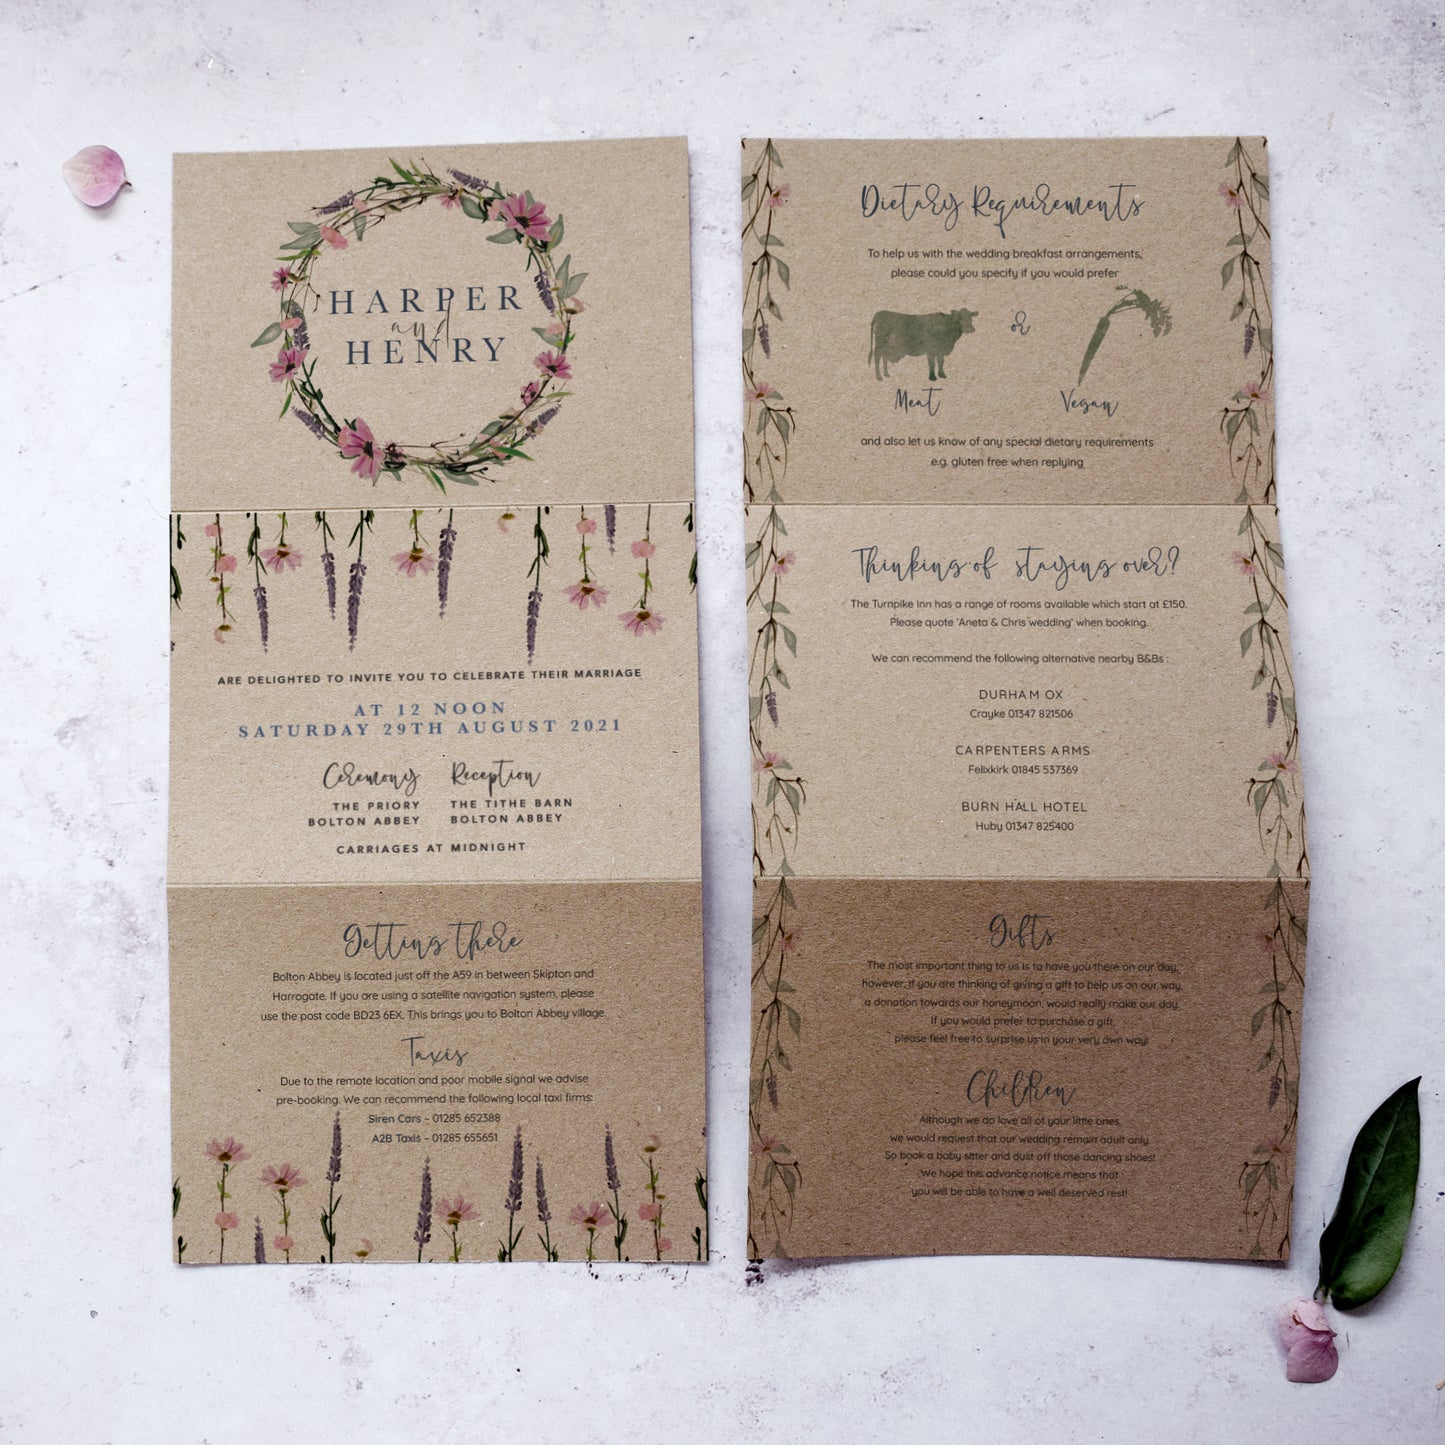 Wedding invites for a rustic wedding from our "whisper kraft' range